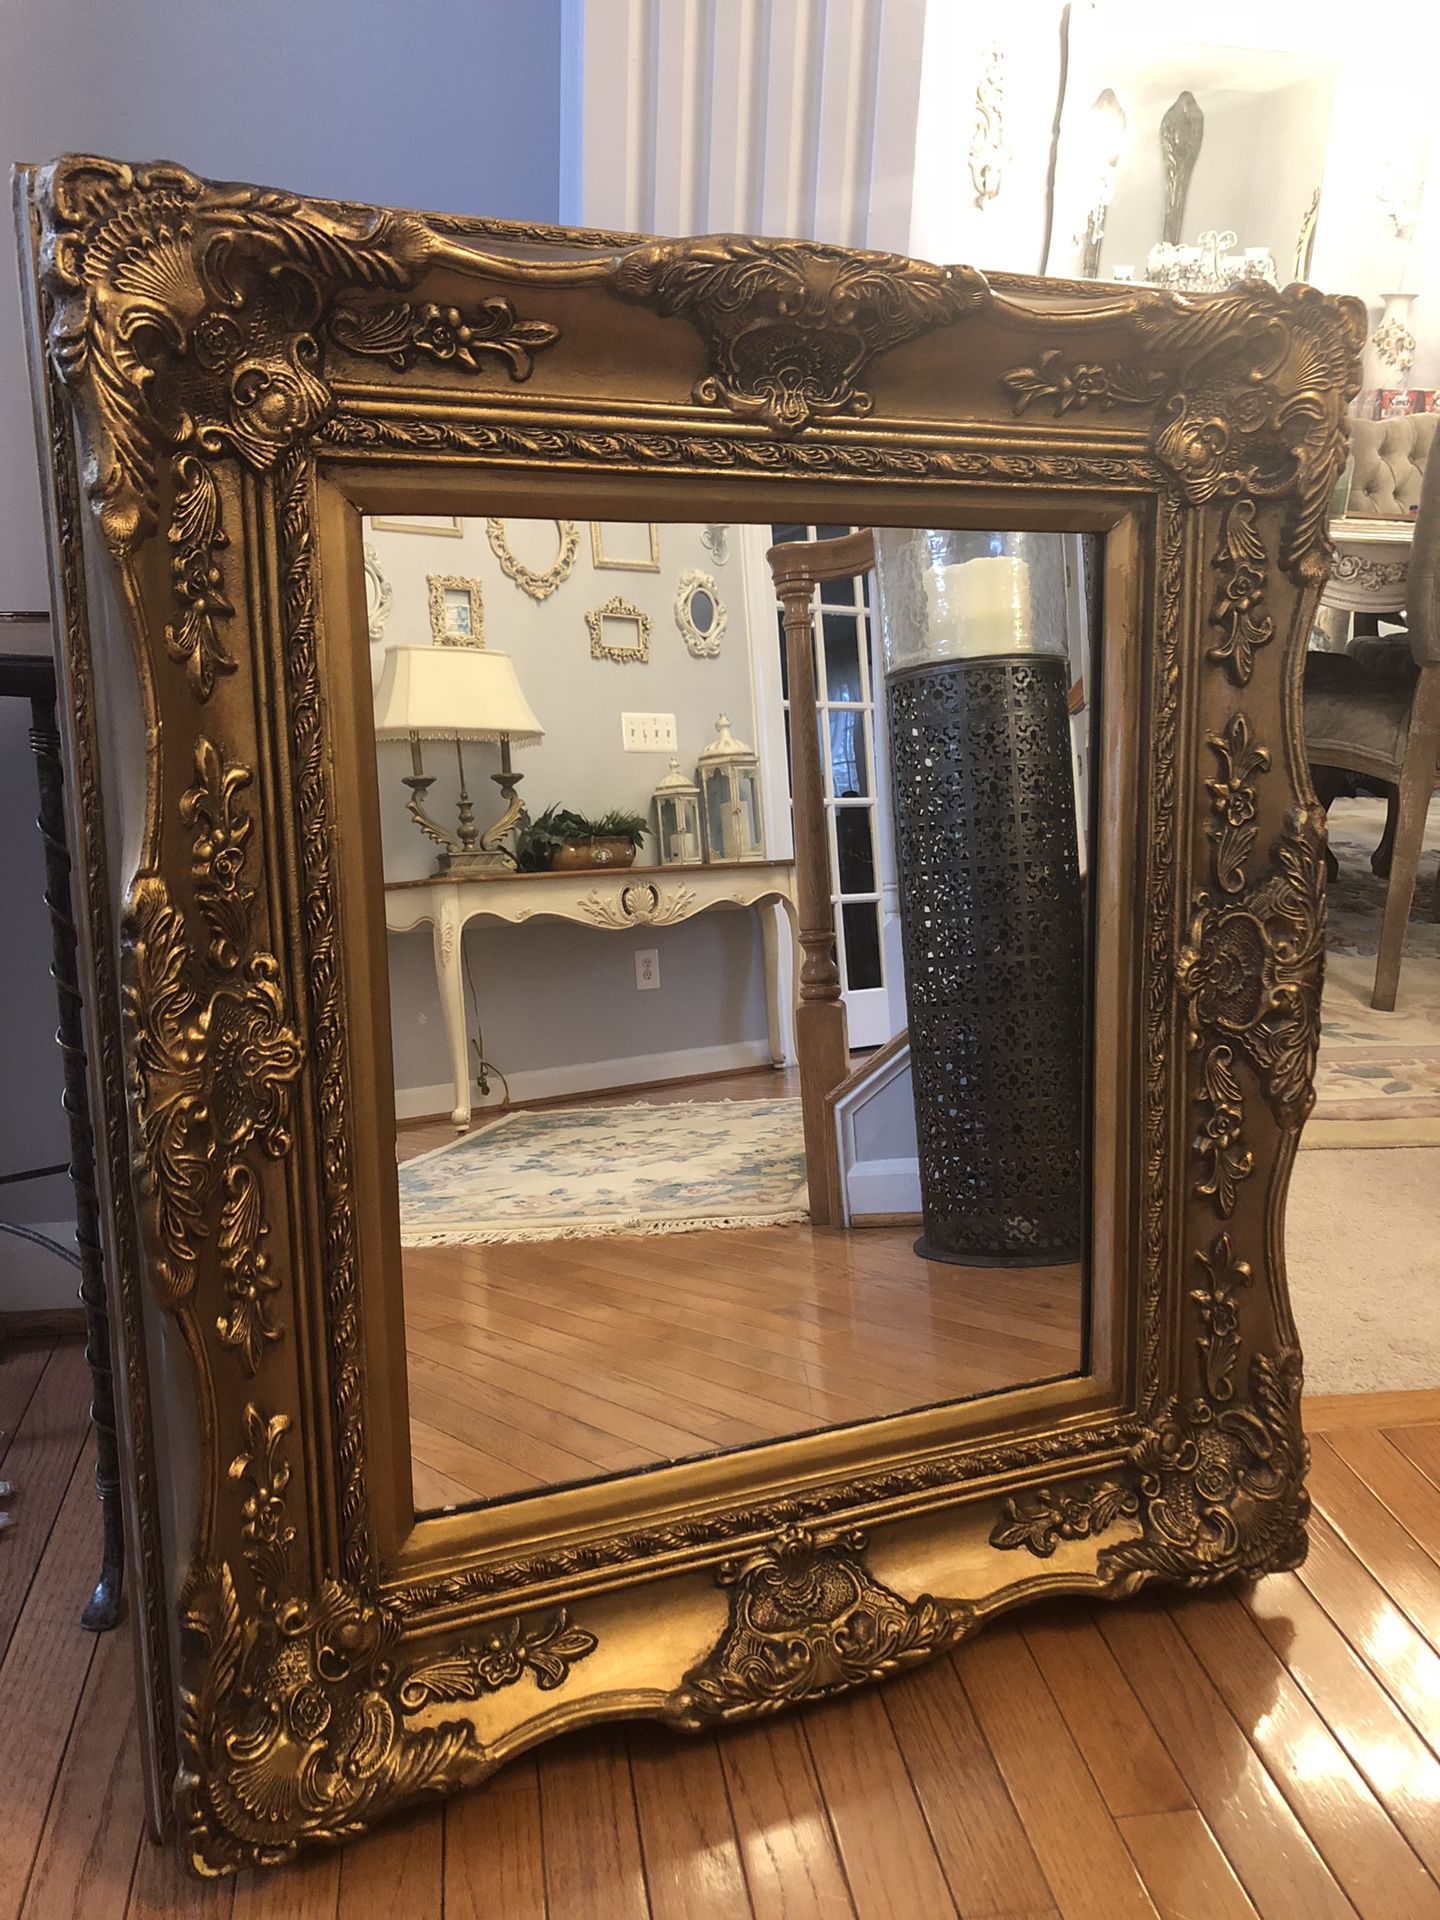 36”X31” beautiful Antique Vintage French Wooden Mirror